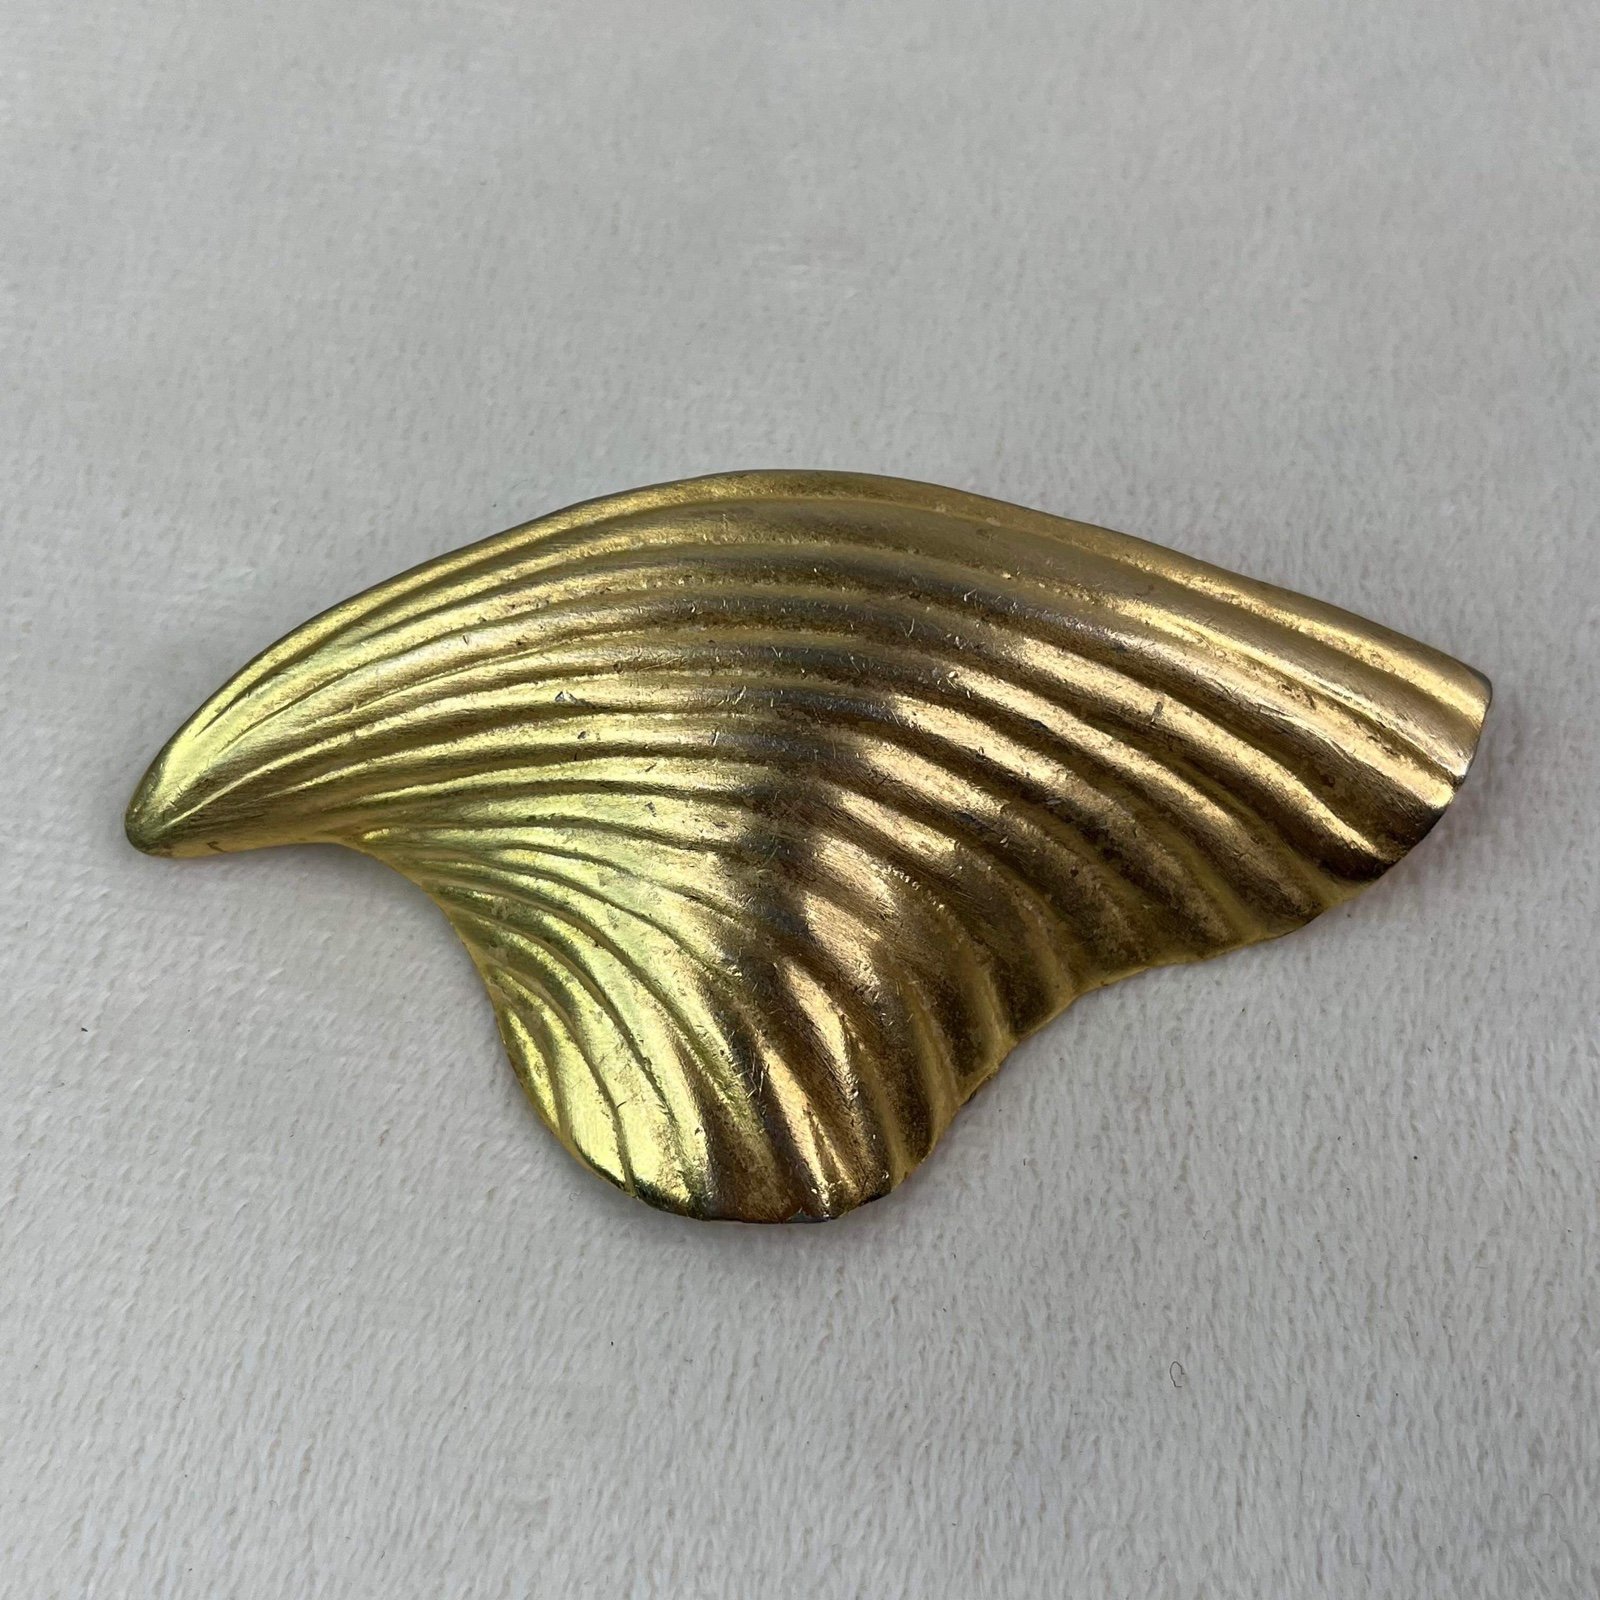 Vintage R.J. Graziano Gold Tone Shell Hair Clip Barrette kZUIuWE2H